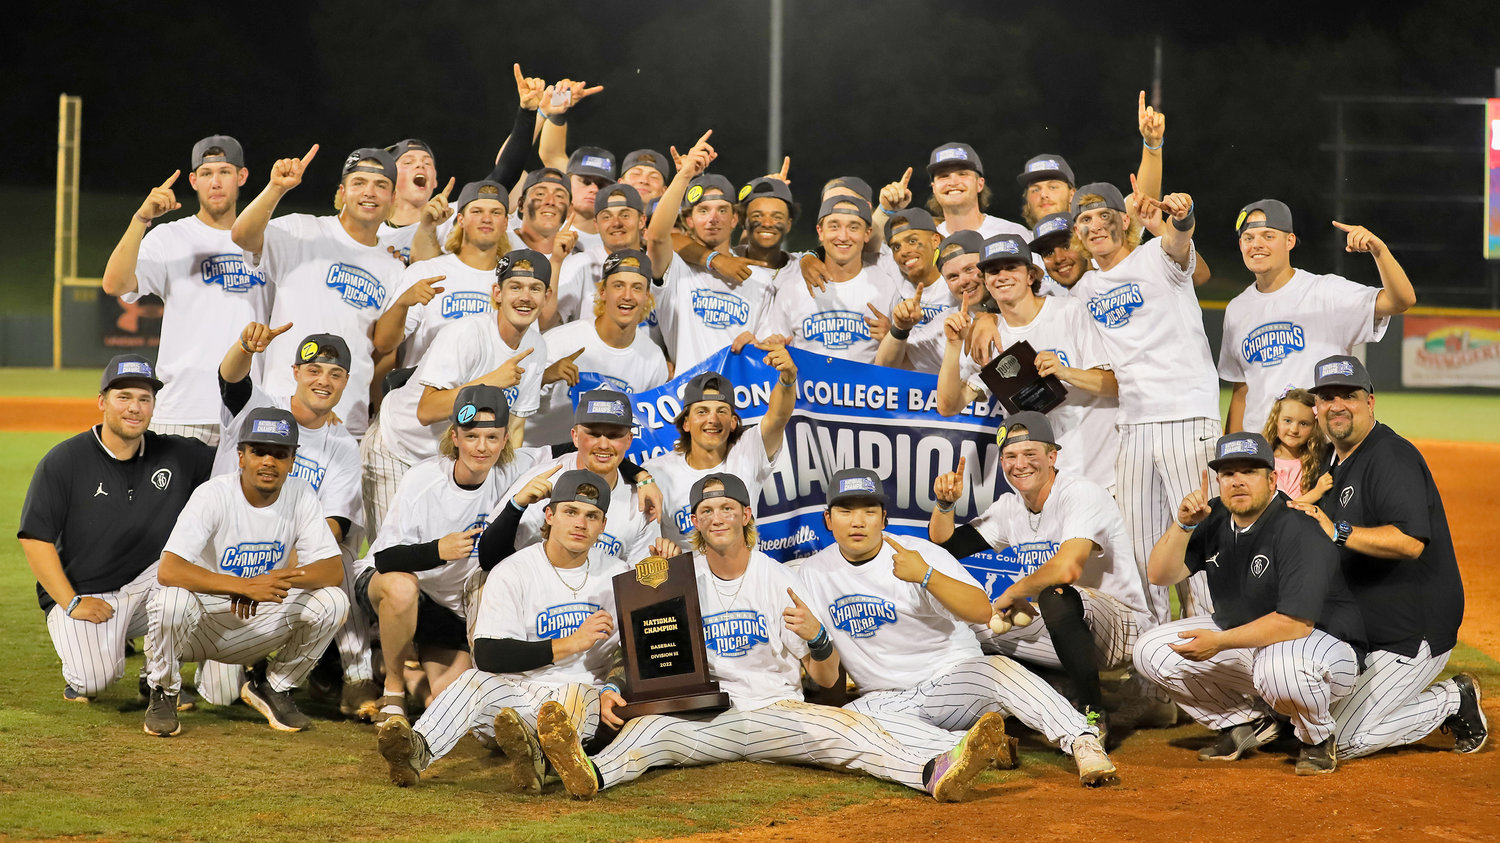 The Herkimer College baseball team won the program’s first ever NJCAA Division III World Series in June 2022.